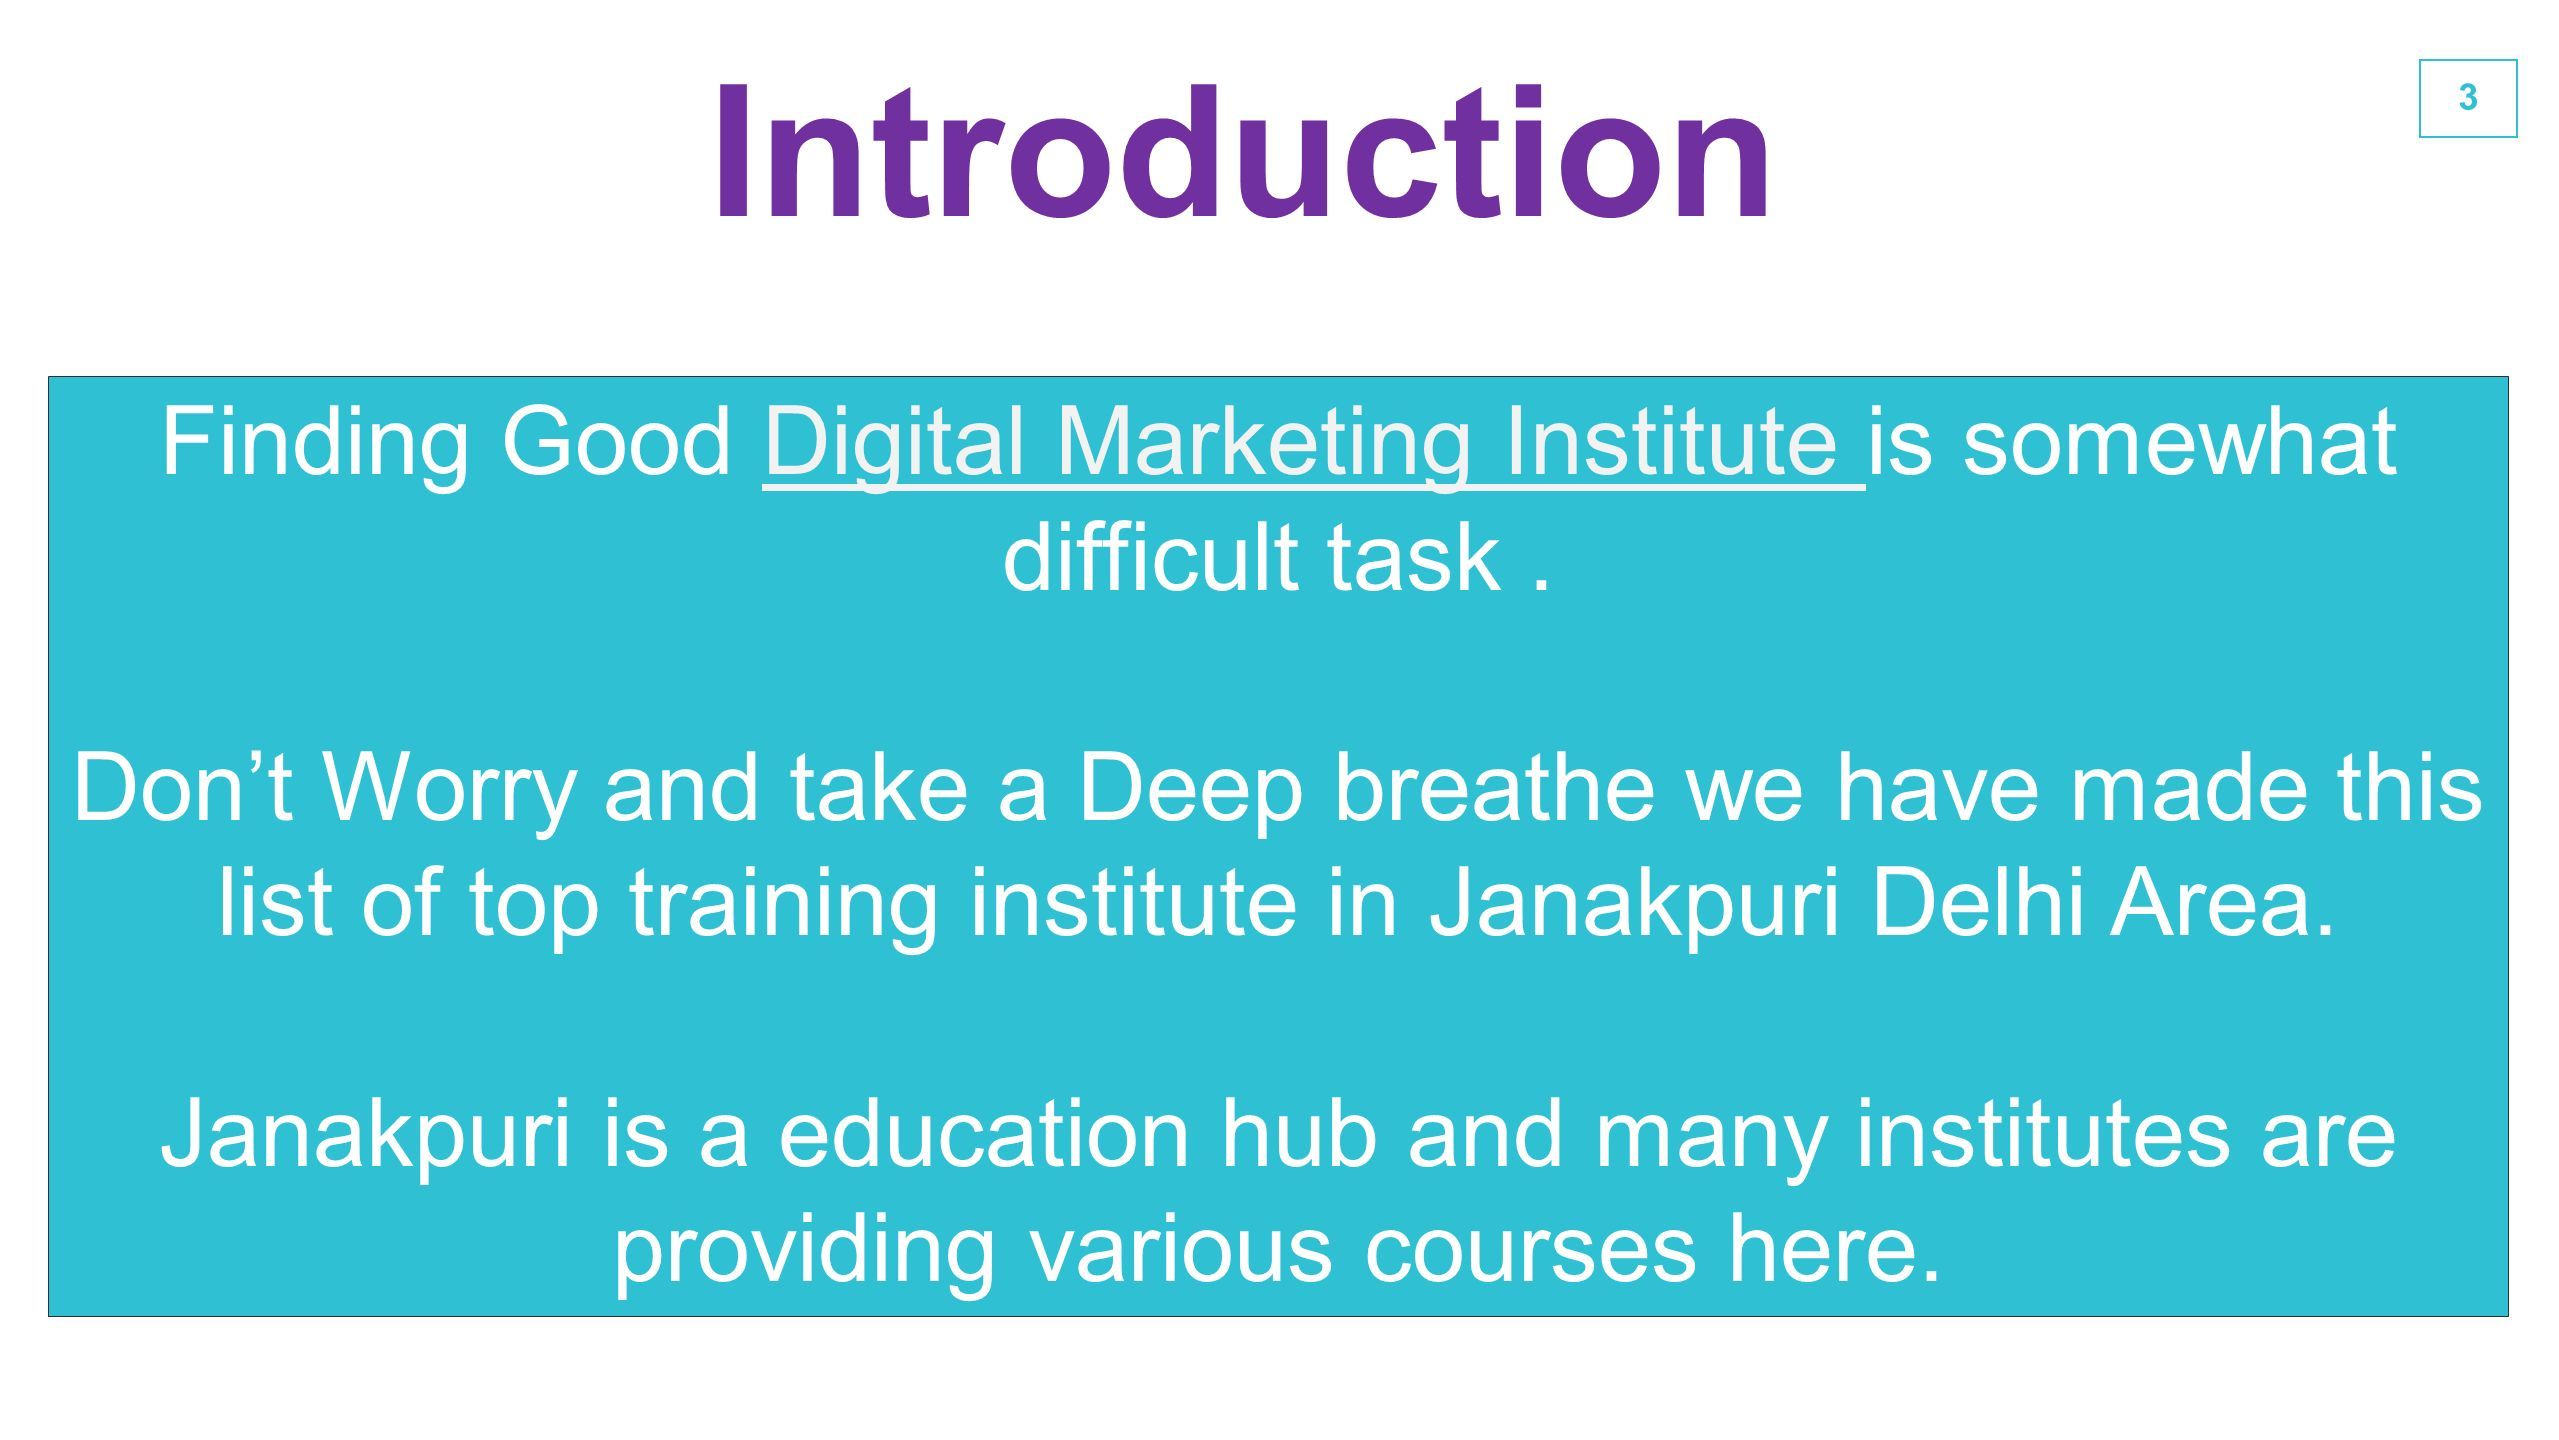 3 Introduction Finding Good Digital Marketing Institute is somewhat difficult task.Digital Marketing Institute Don’t Worry and take a Deep breathe we have made this list of top training institute in Janakpuri Delhi Area.